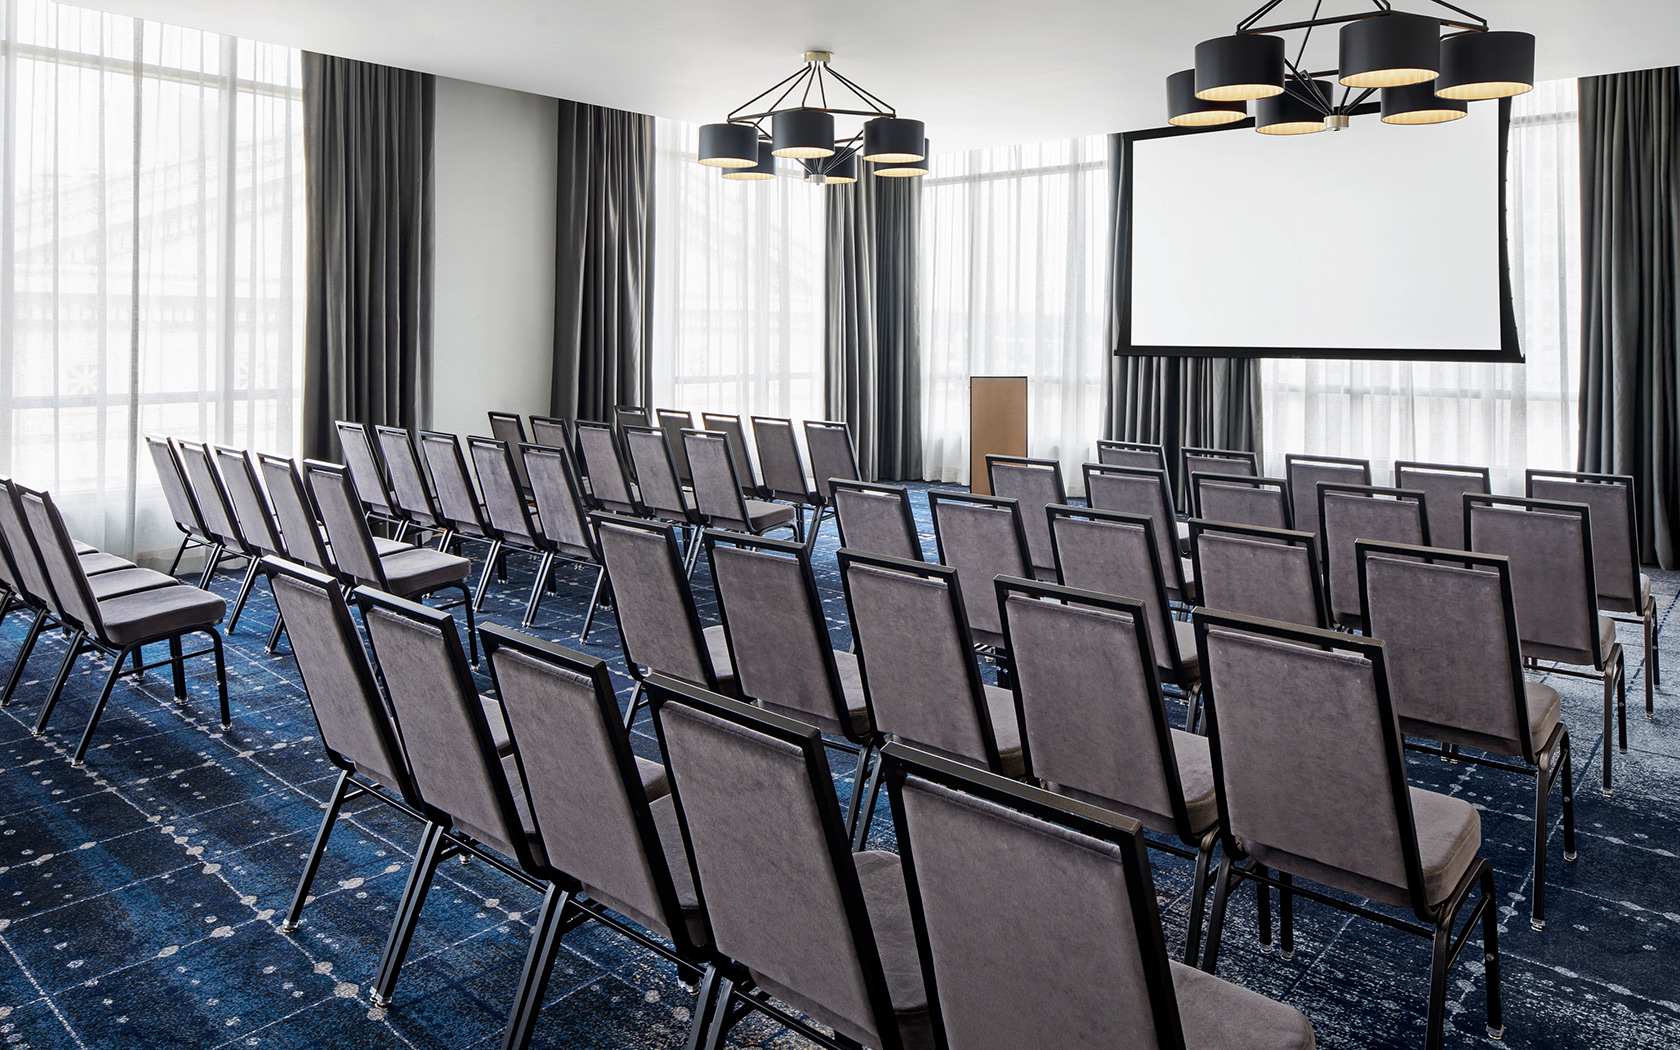 gallery many rows of chairs in a meeting room with a projection screen and dim lighting